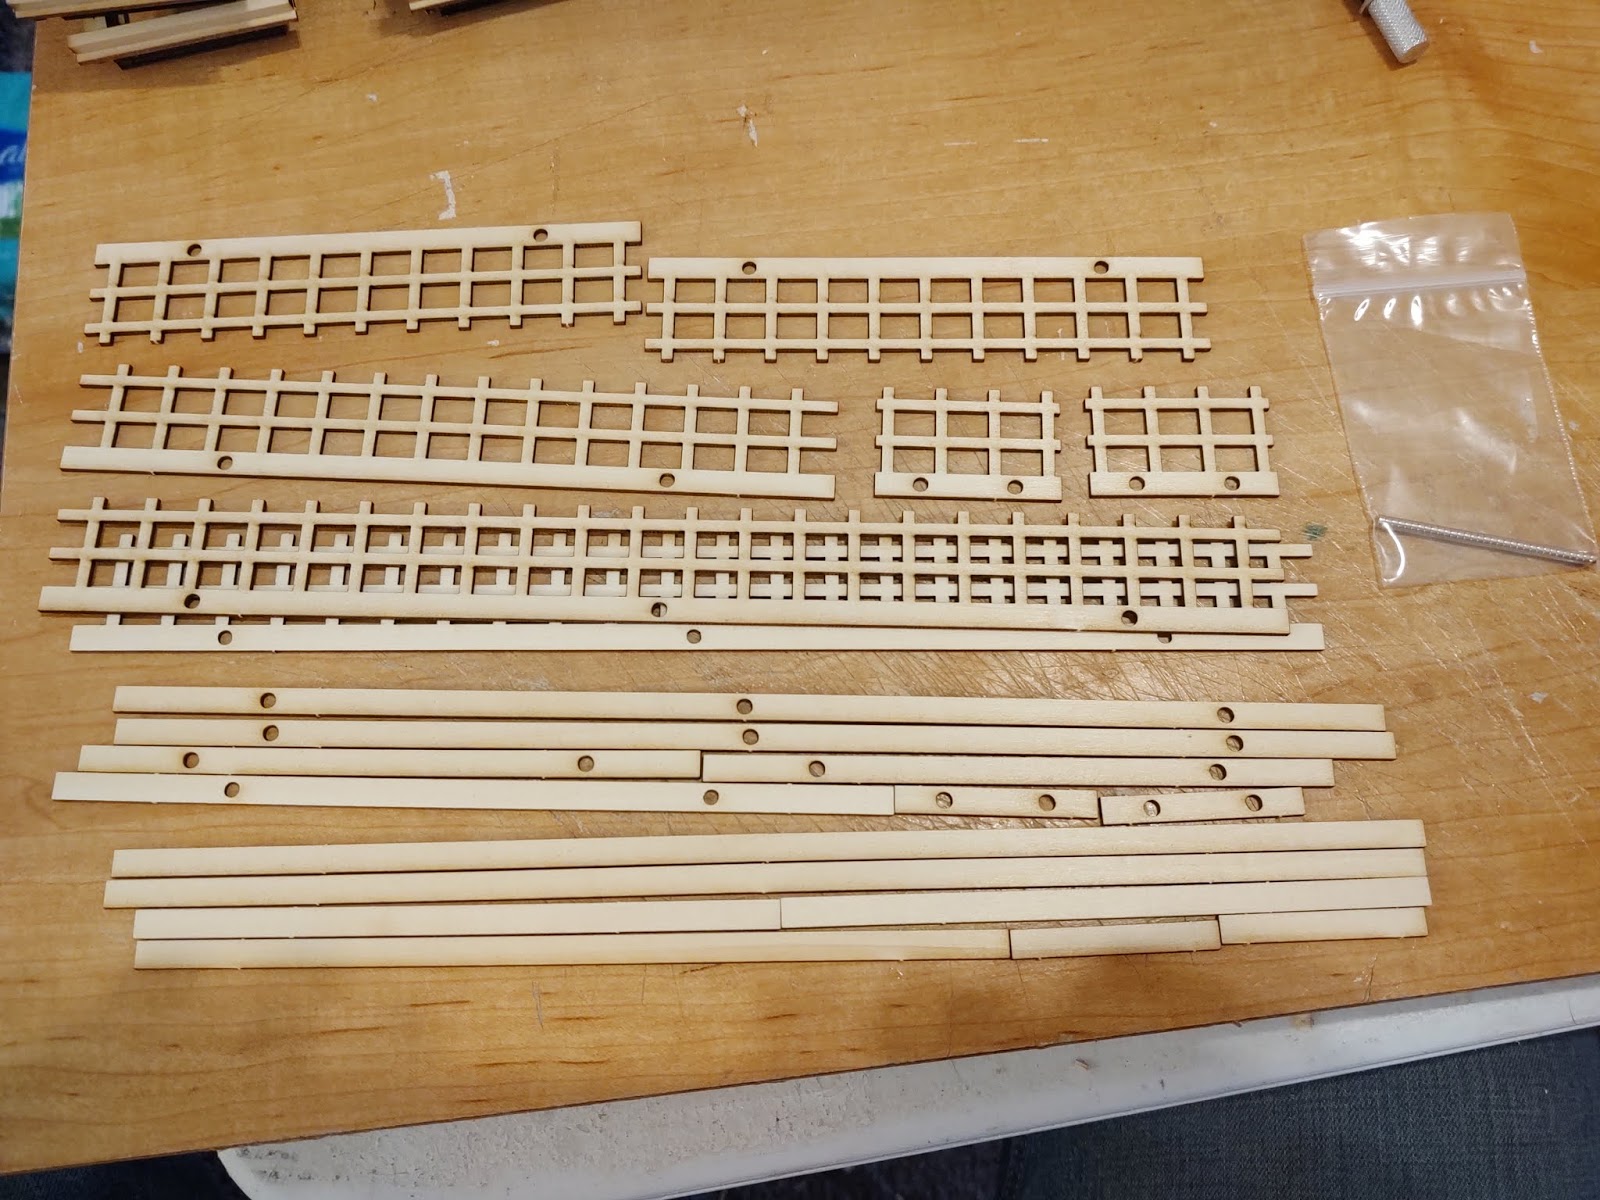 AdventHousePlans: Fencing Updates! With the new Laser Cut Structure